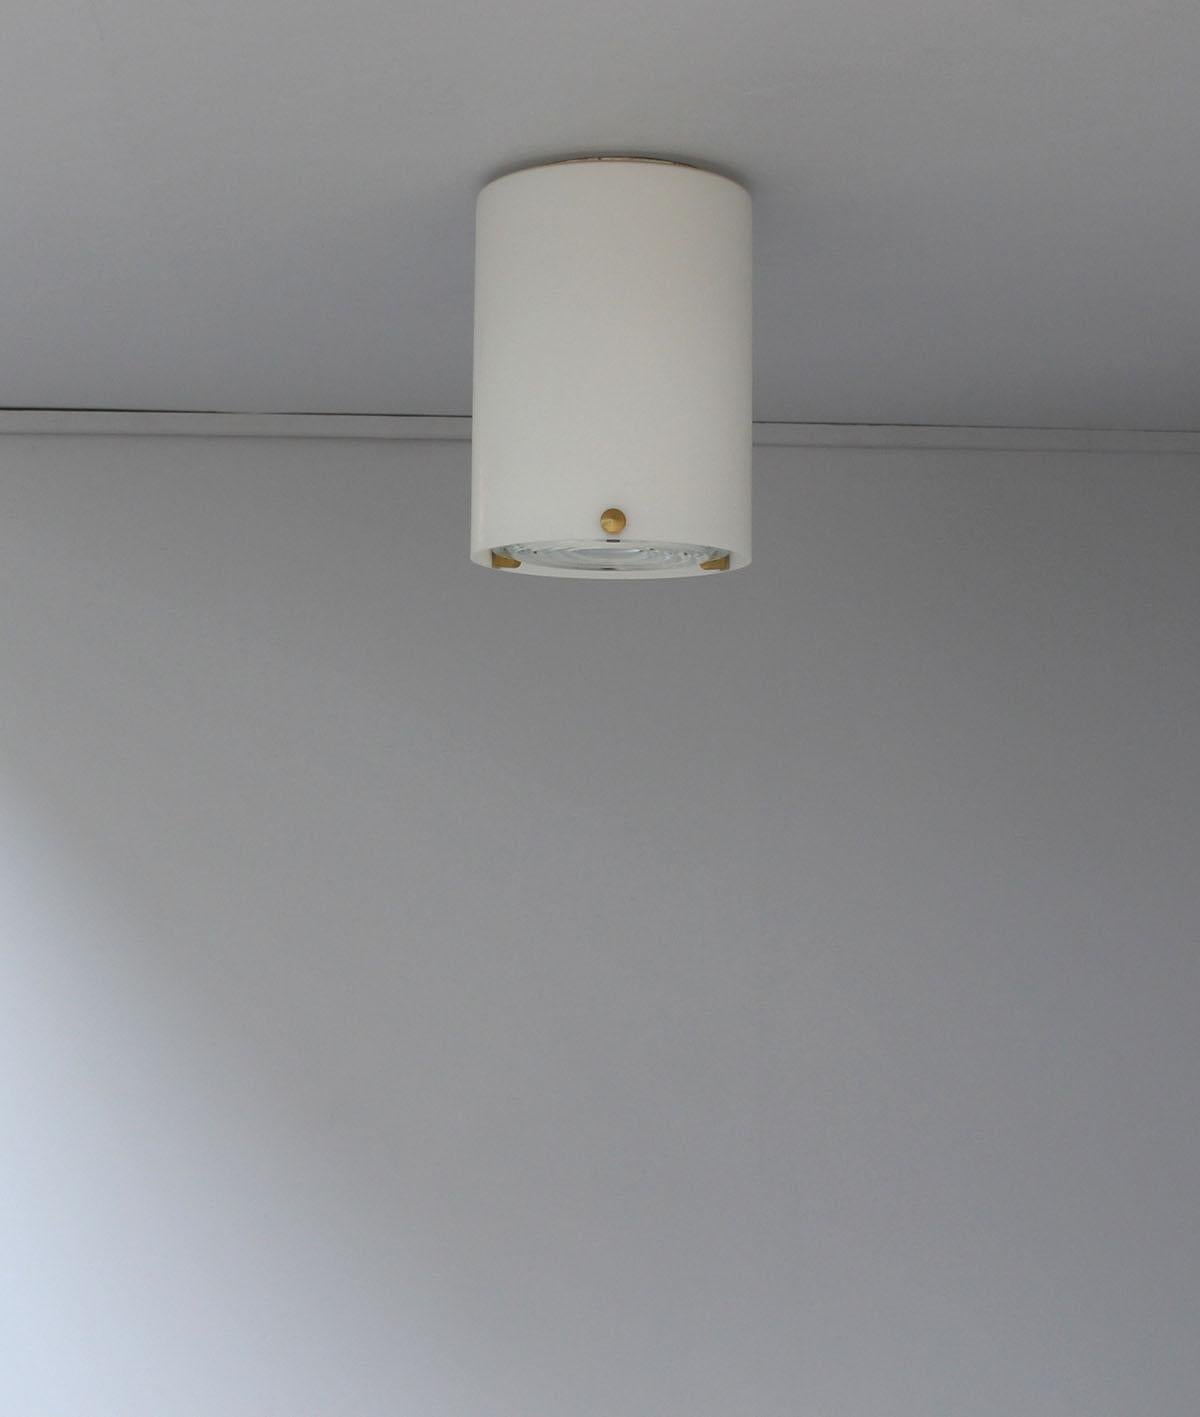 Jean Perzel - A fine French mid-century cylinder-shaped flush mounts / ceiling lights in satin enameled glass with three brass studs that support a prismatic glass lens.
   